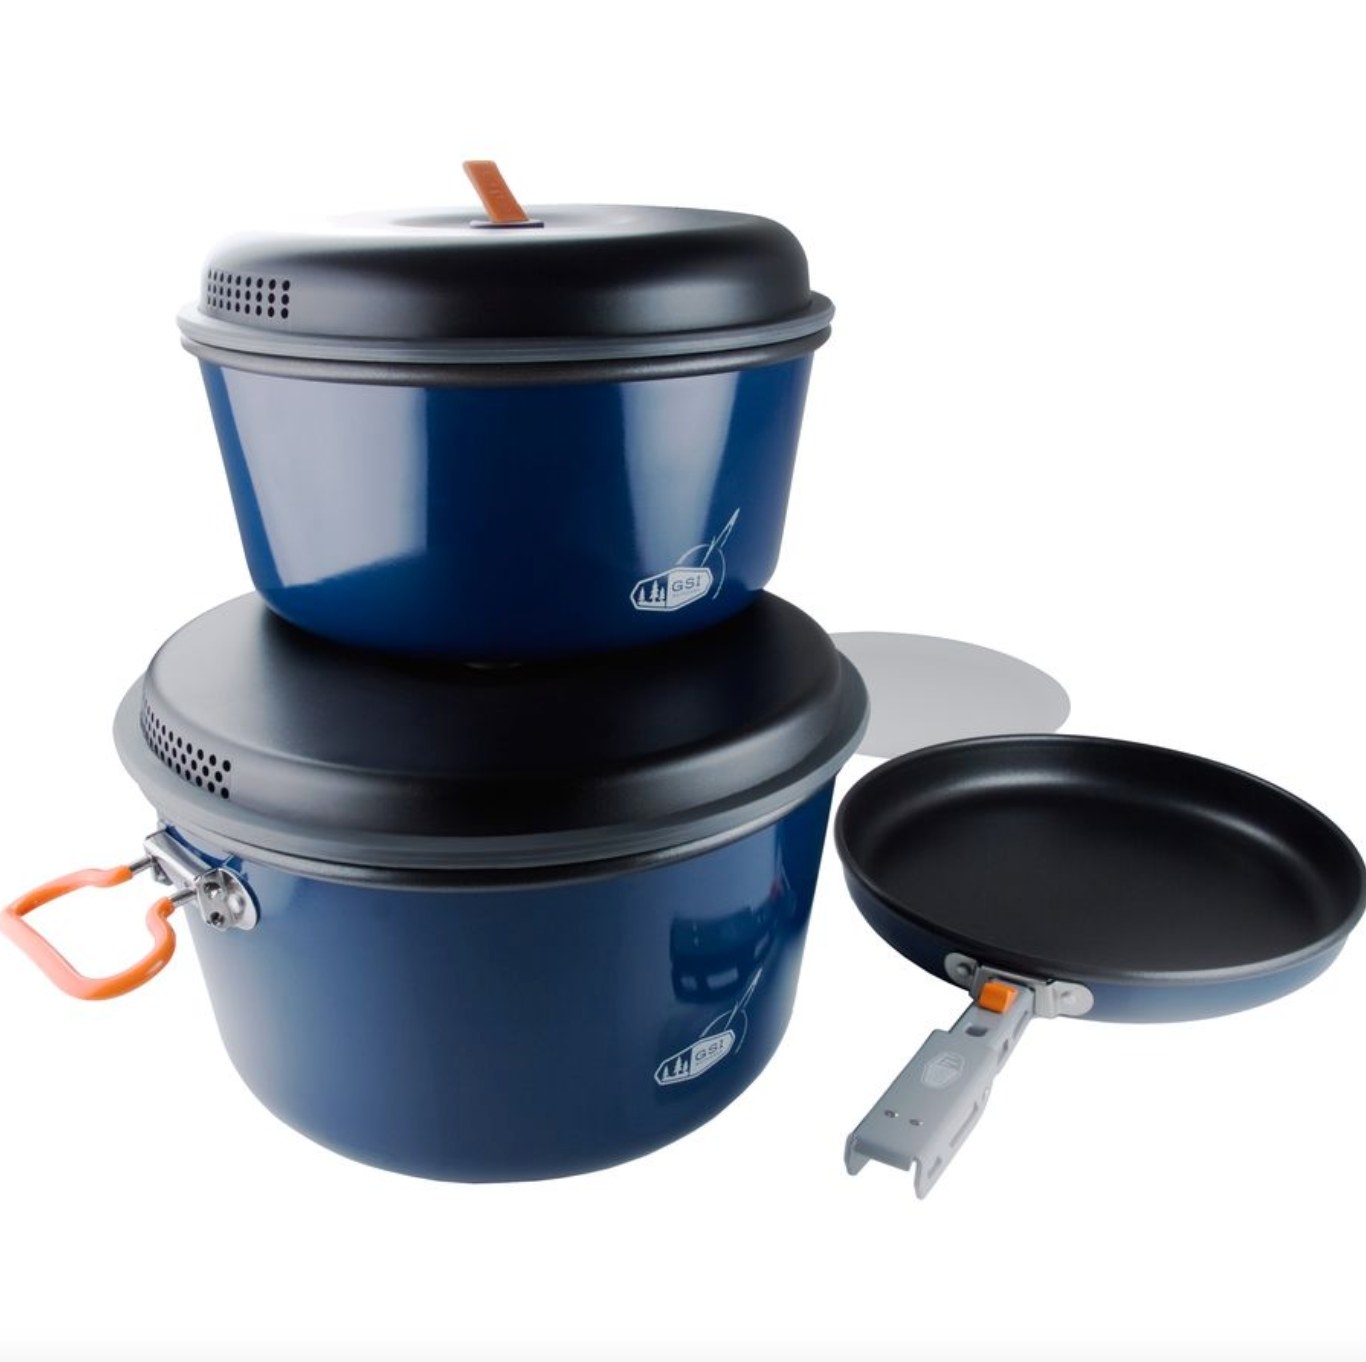 The GSI Outdoors base camper cookset